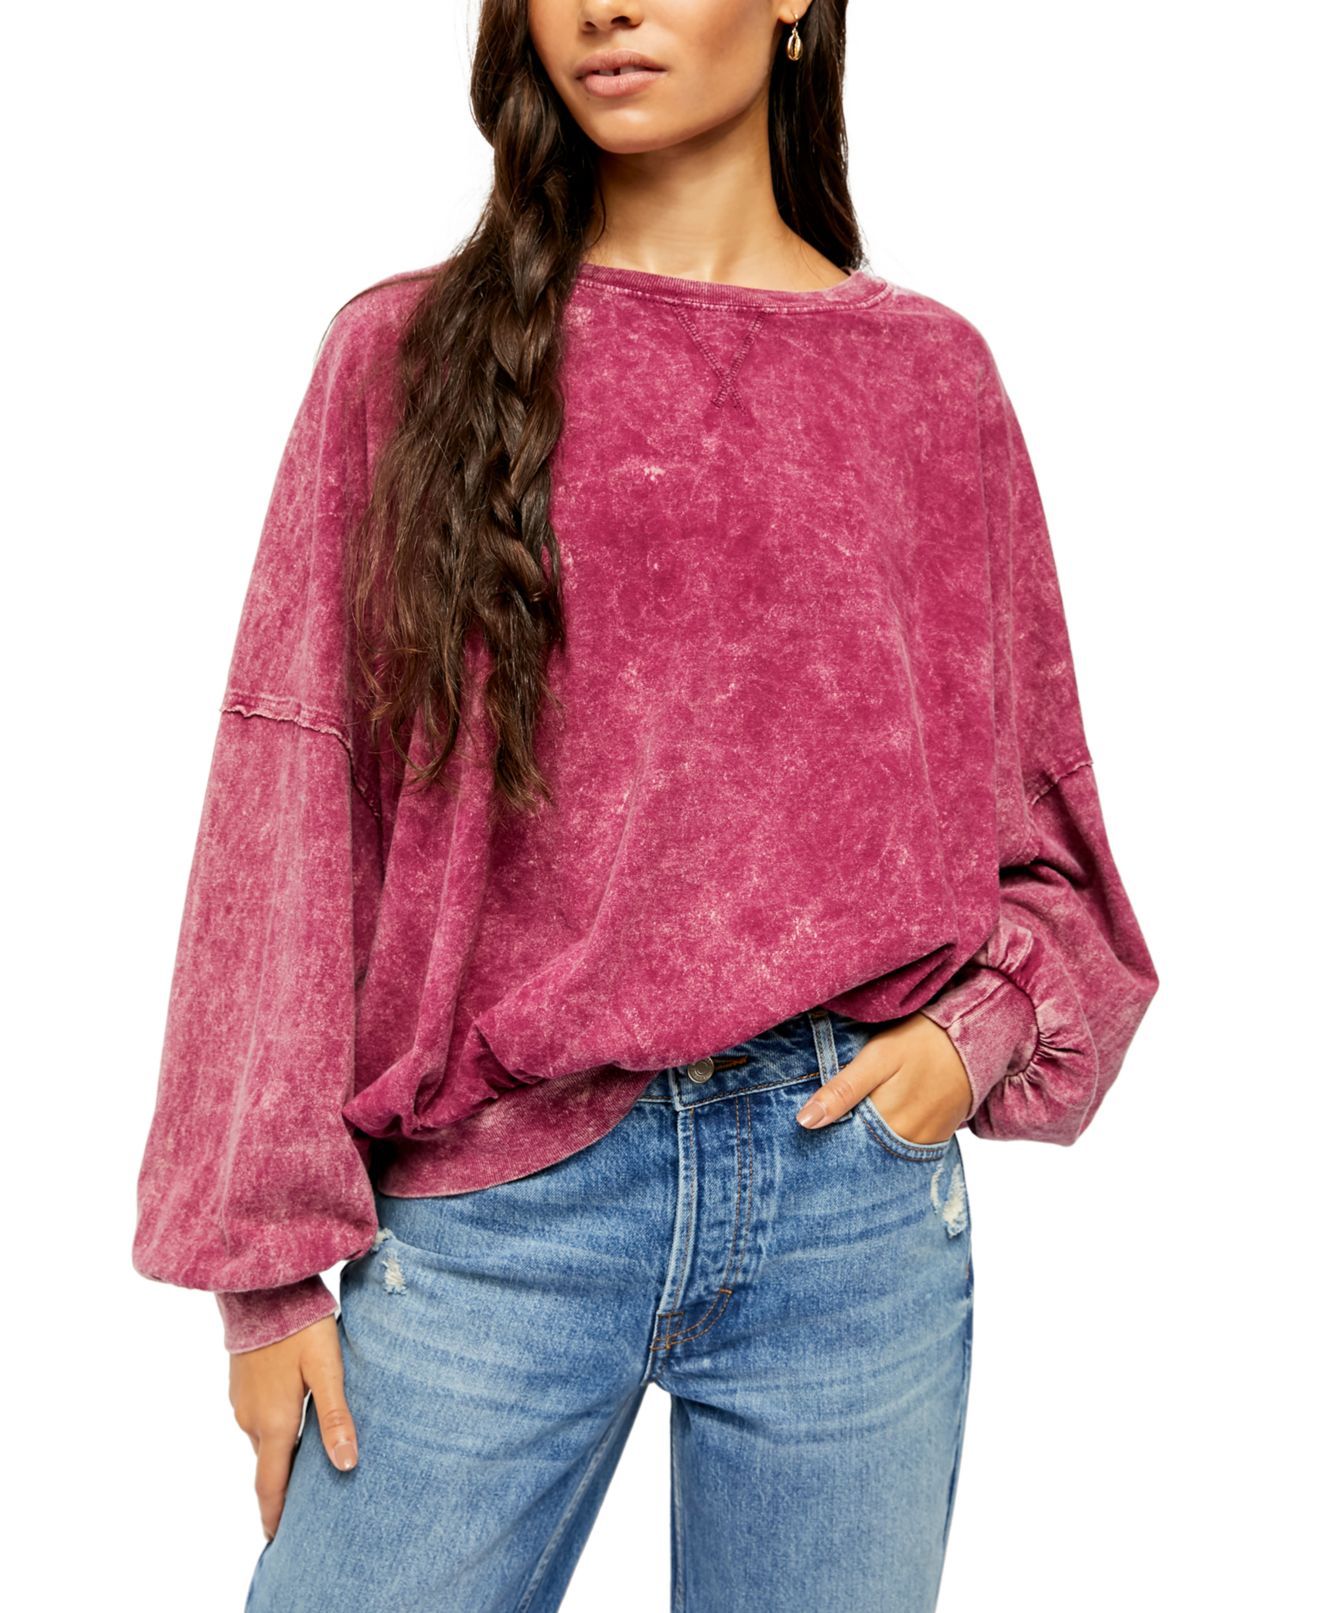 Color: Purples Size Type: Regular Size (Women's): S Sleeve Length: Long Sleeve Type: T-Shirt Style: Knit Top Neckline: Round Neck Pattern: Solid Theme: Colorful Material: 100% Cotton